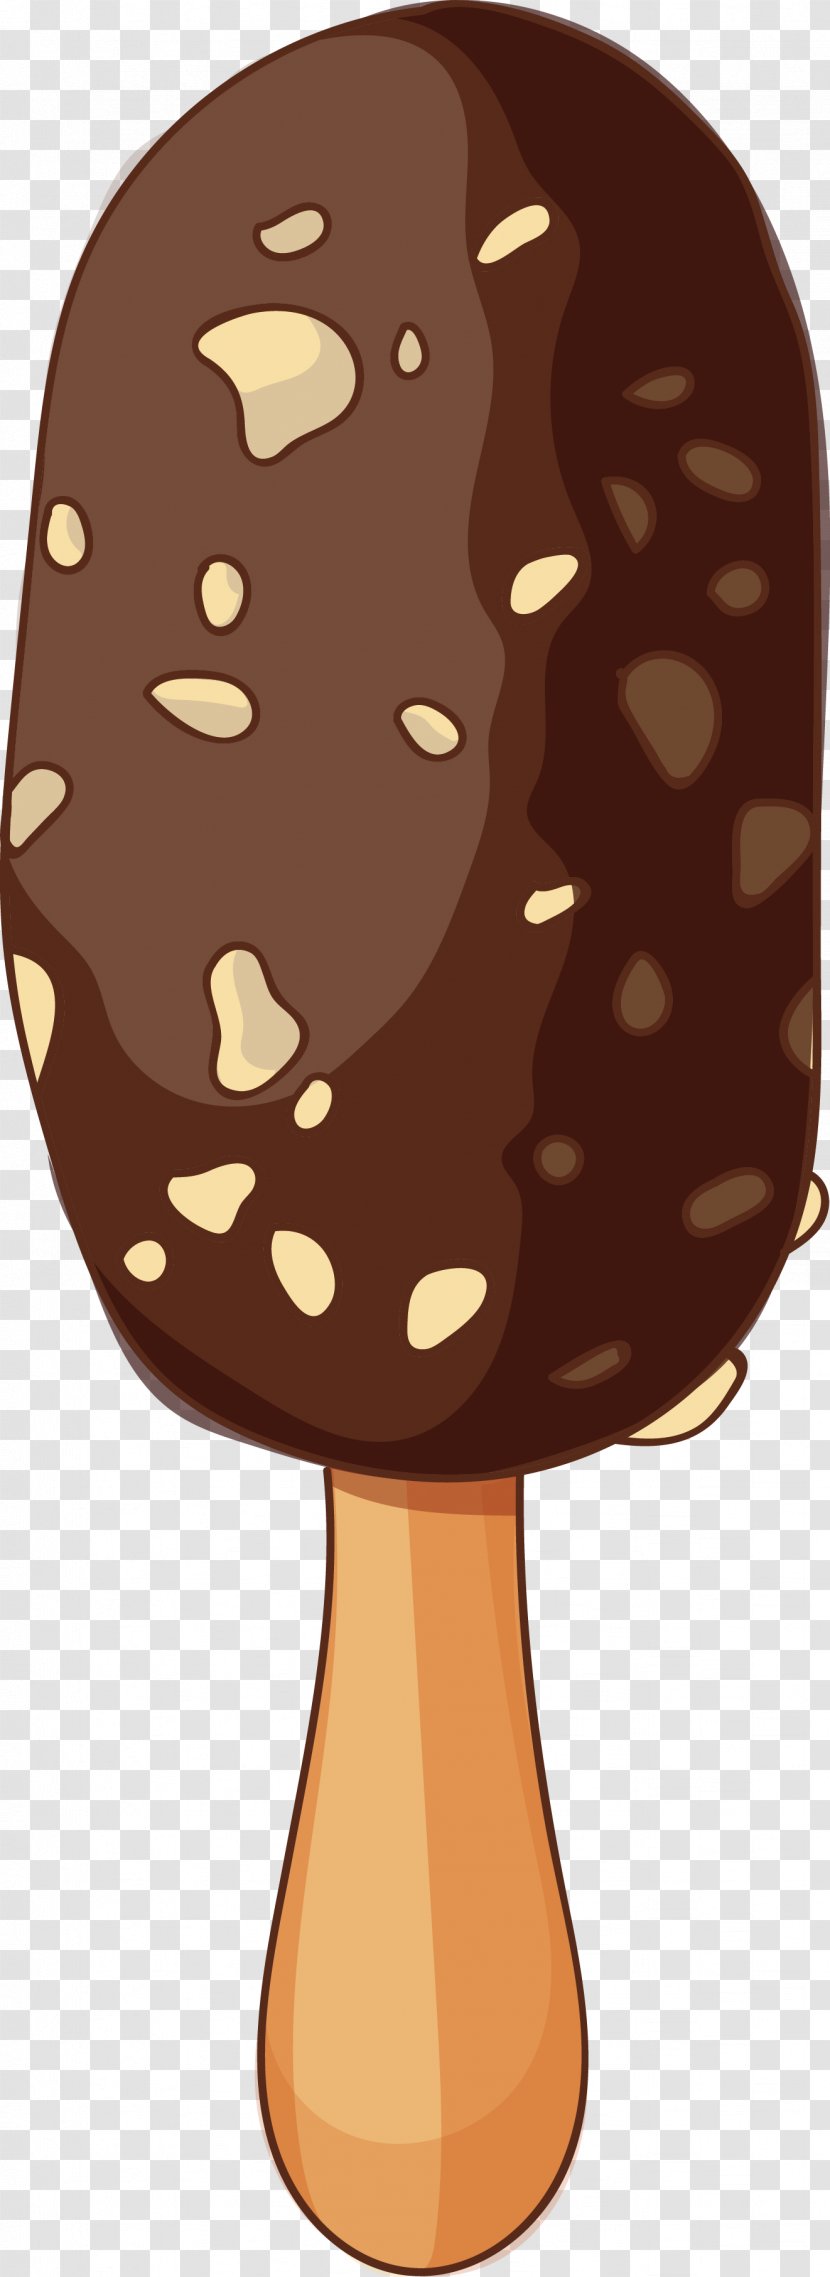 Chocolate Ice Cream Pop - Popsicles Vector Transparent PNG